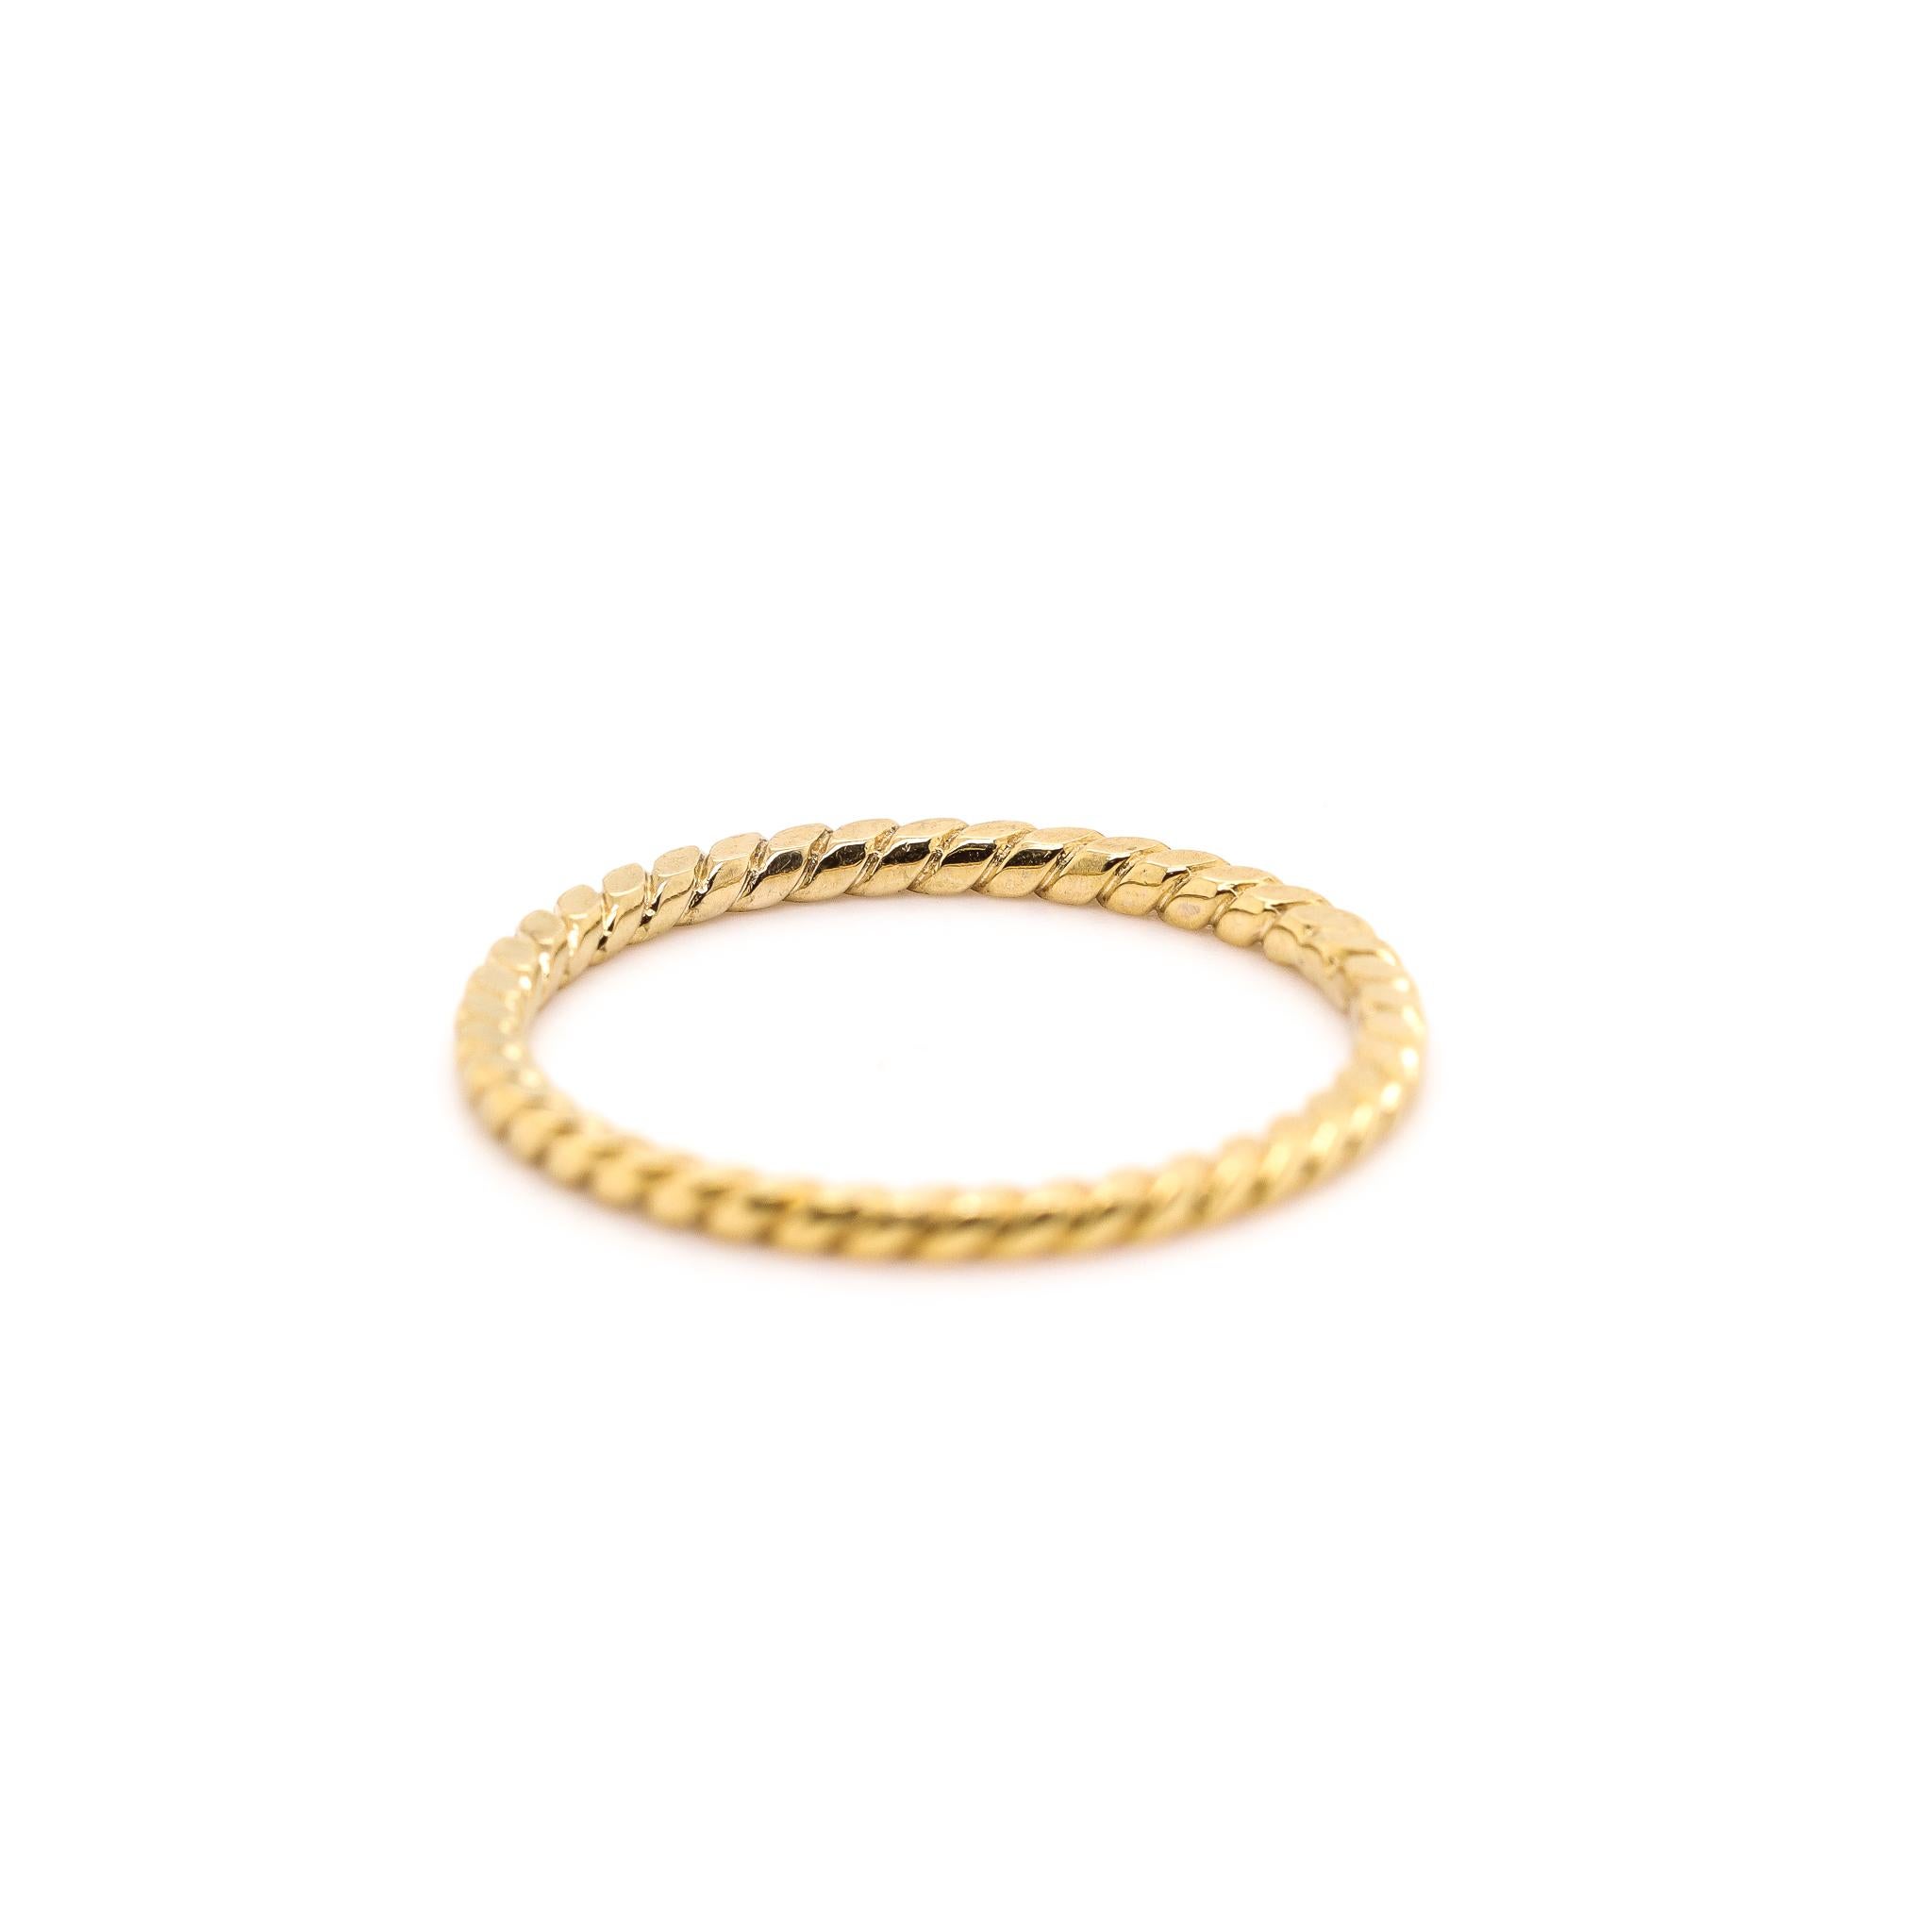 One lady's custom made textured & polished 14K yellow gold, trinity ring with a half round shank. The ring is a size 6.25. The ring weighs a total of 1.10 grams. In excellent condition.

SKU: 133705